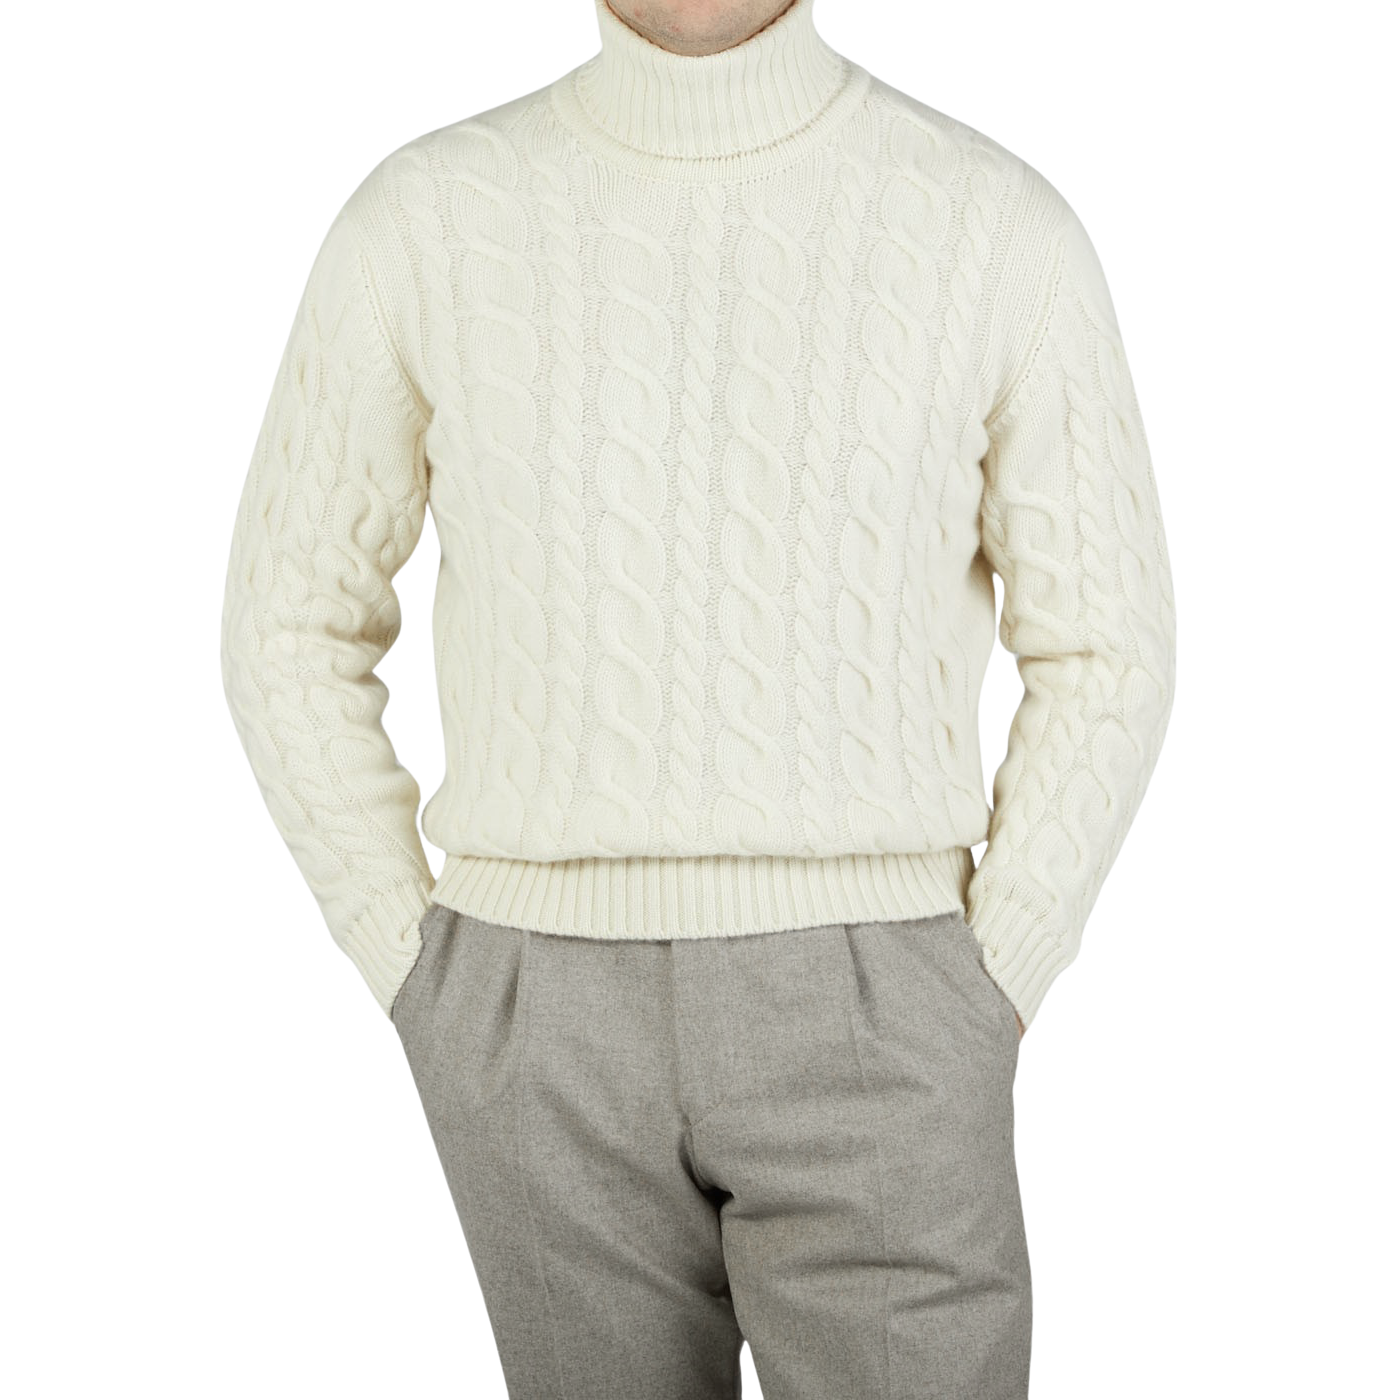 William Lockie, a man wearing an Ecru Cable Knit Pure Cashmere Rollneck sweater made by William Lockie.